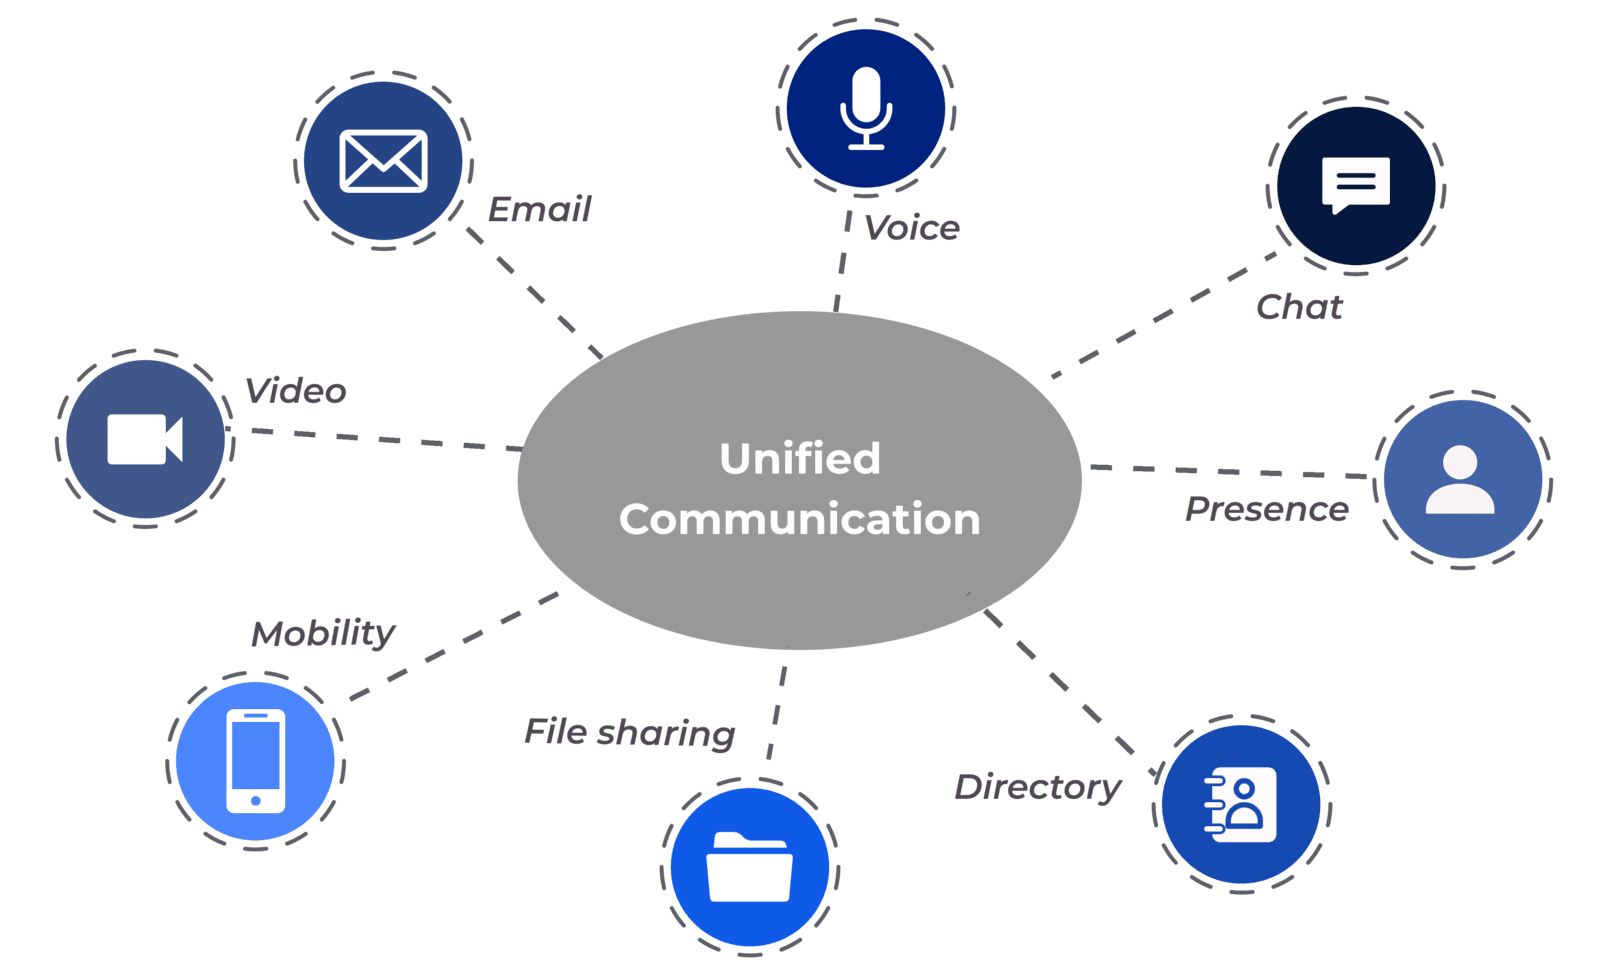 A diagram that shows all the components of Unified Communication while using a Cloud PBX system.